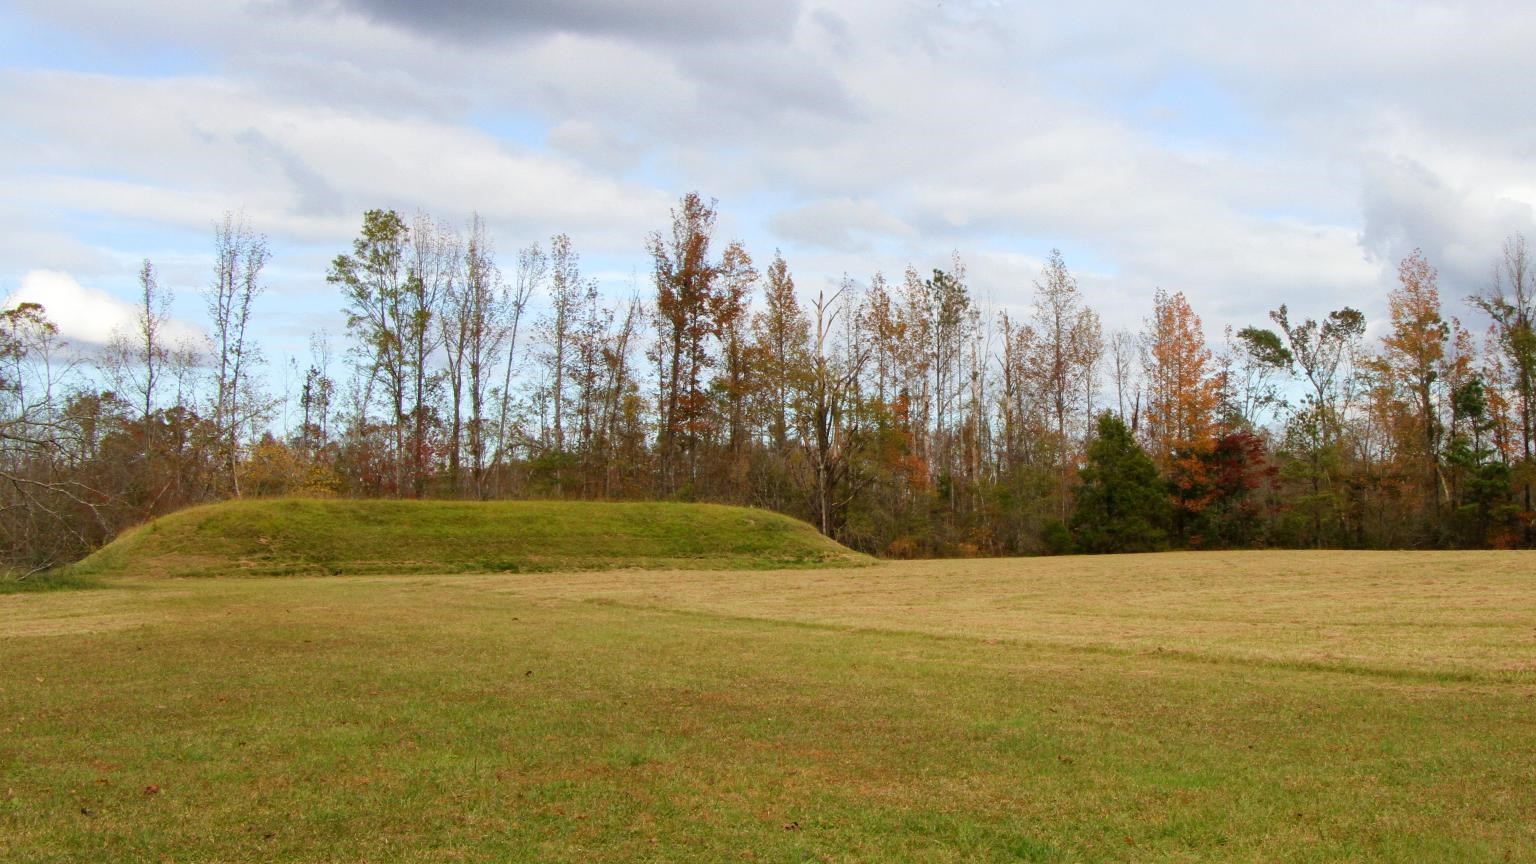 Flat topped mound is in the distance with a line of orange and green trees behind it.